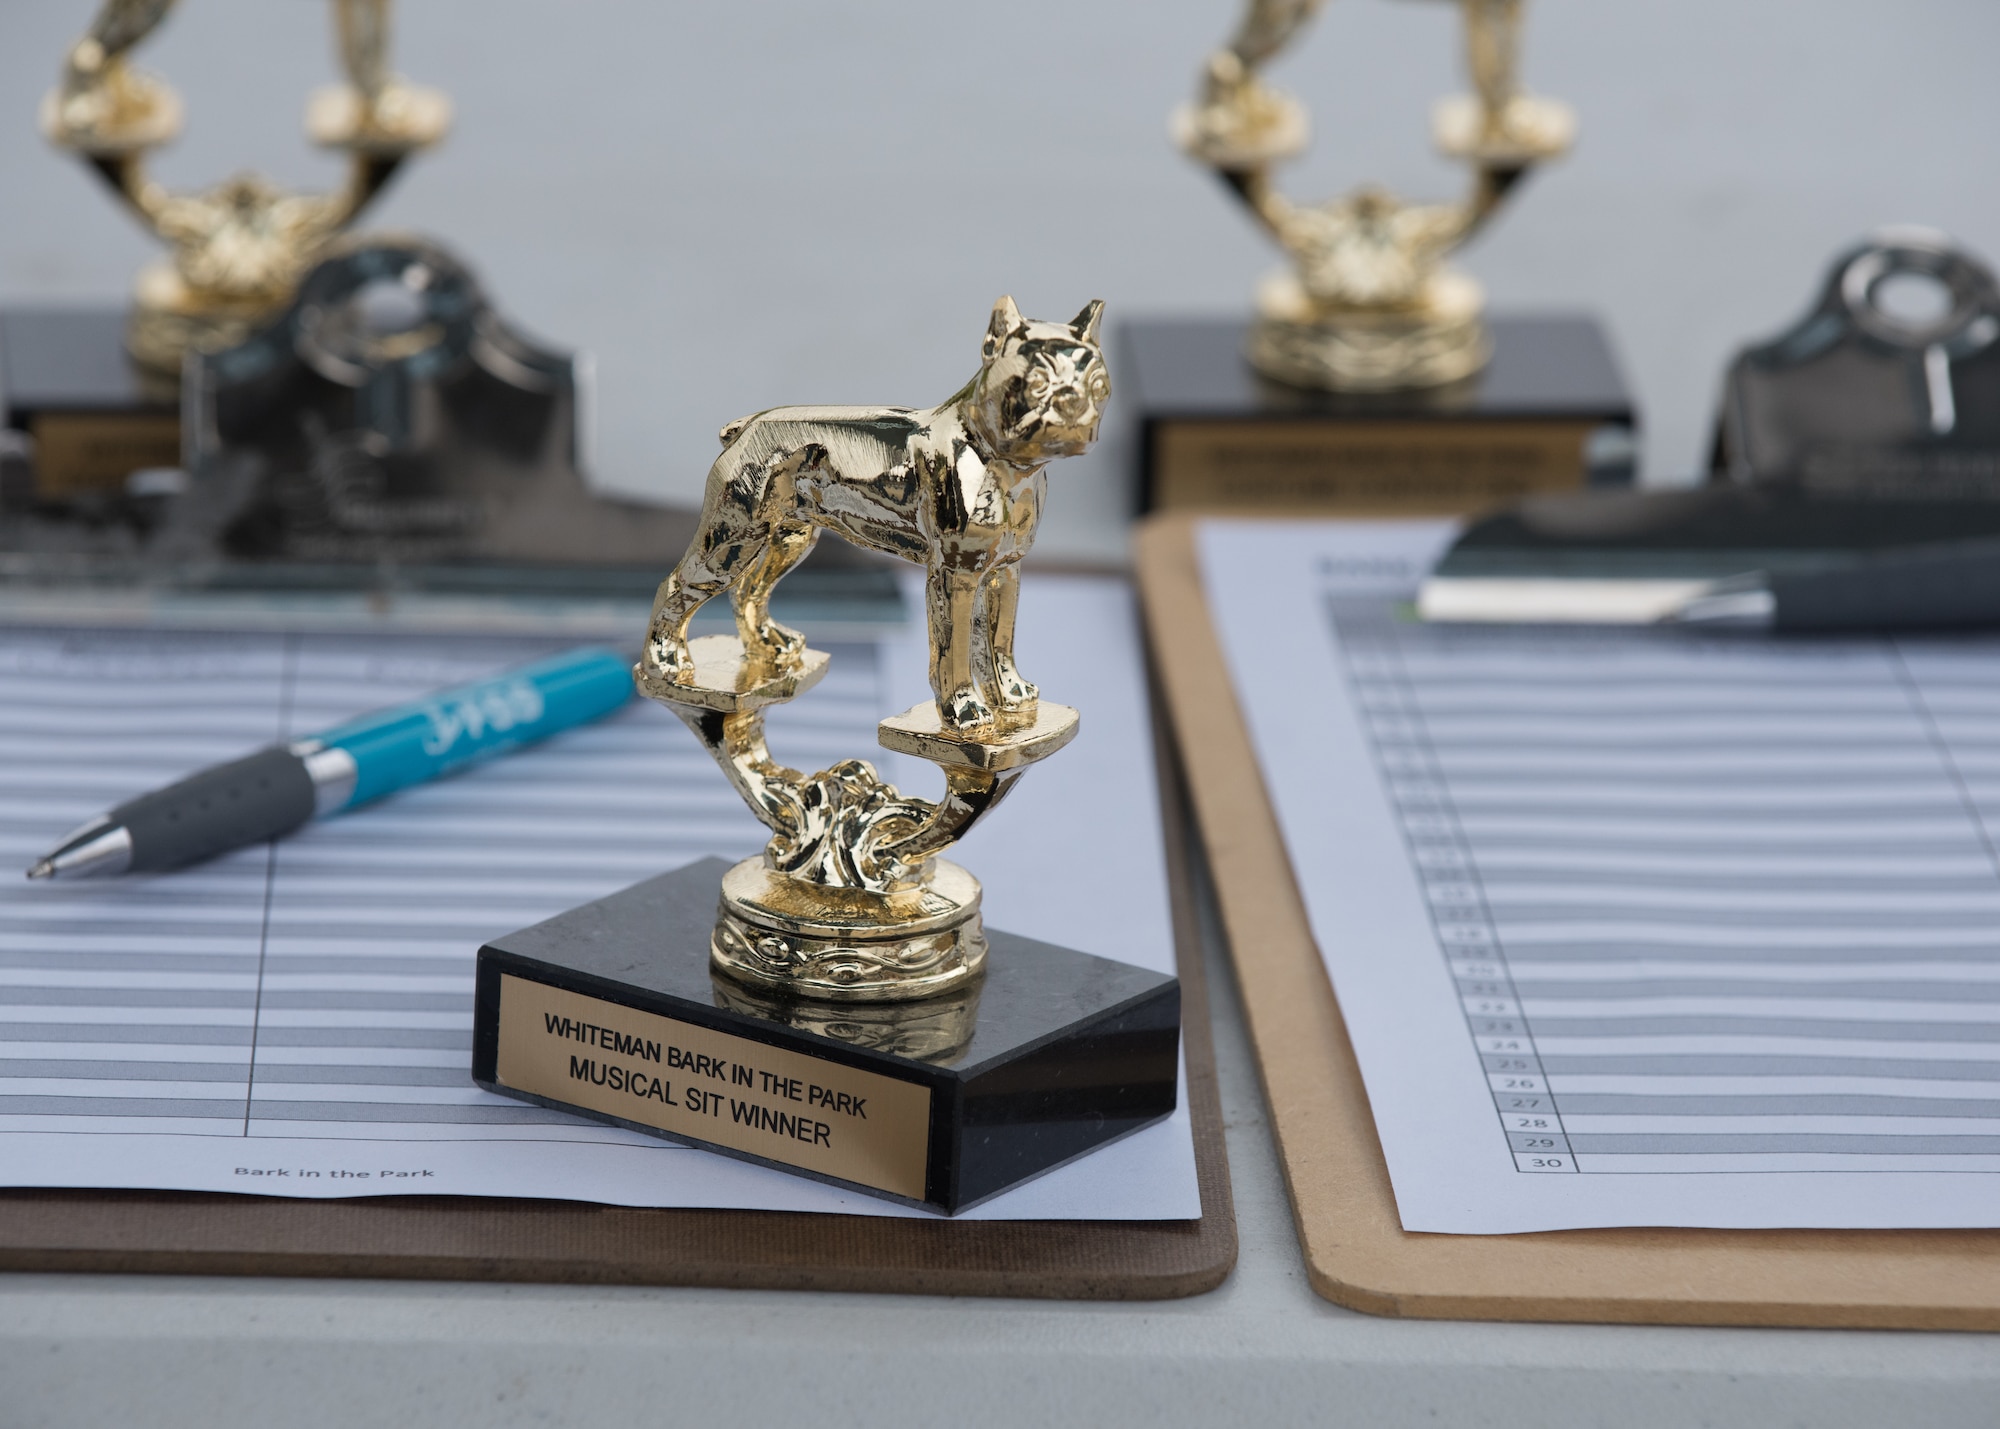 The Musical Sit trophy sits on a table during the Bark in the Park.